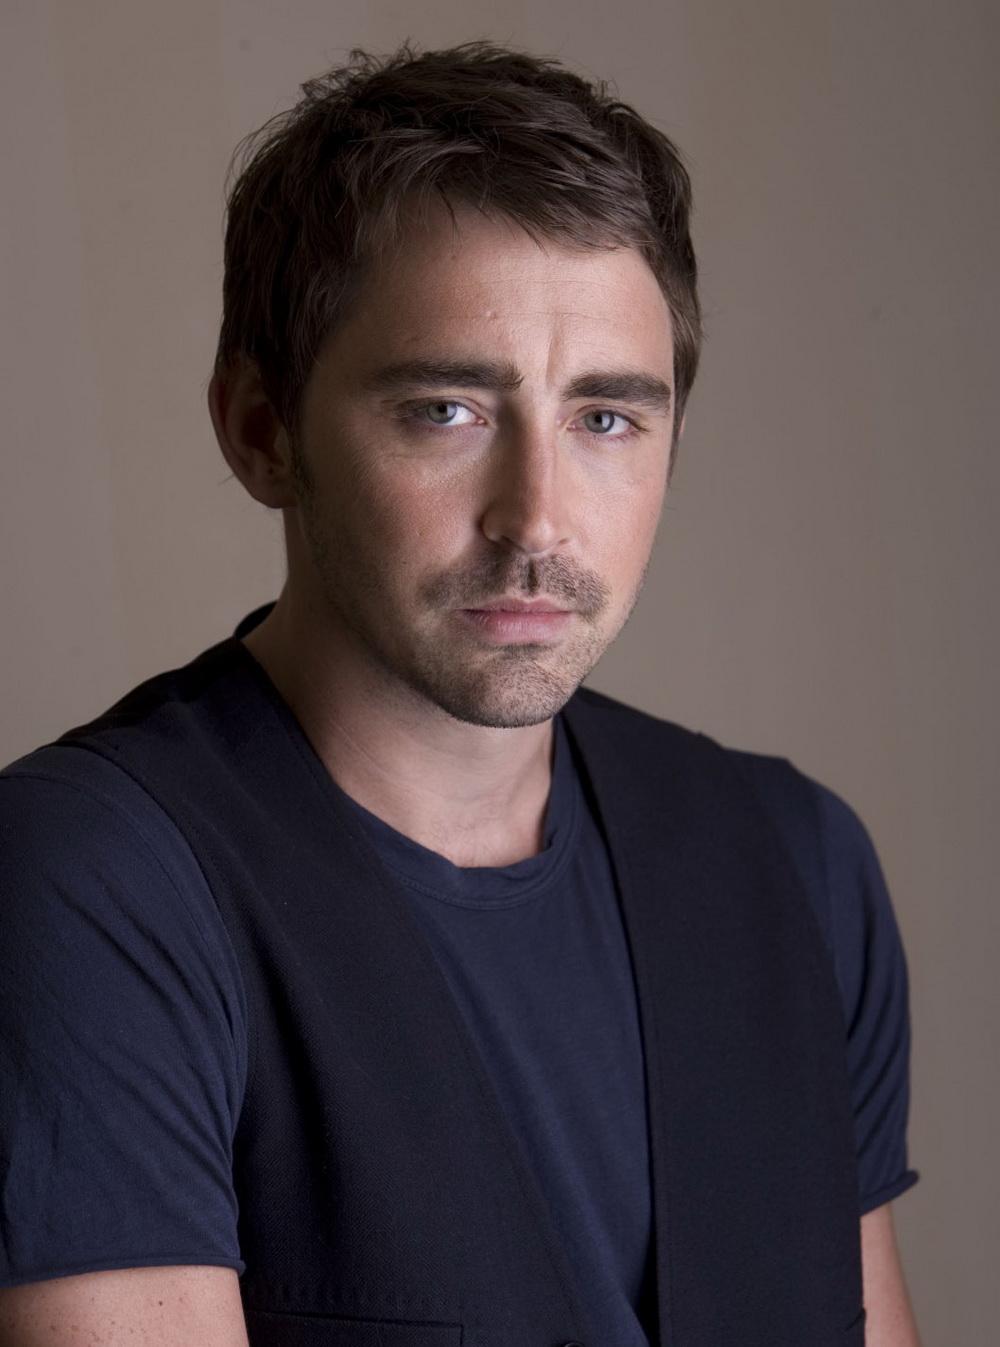 Photo №17956 Lee Pace.